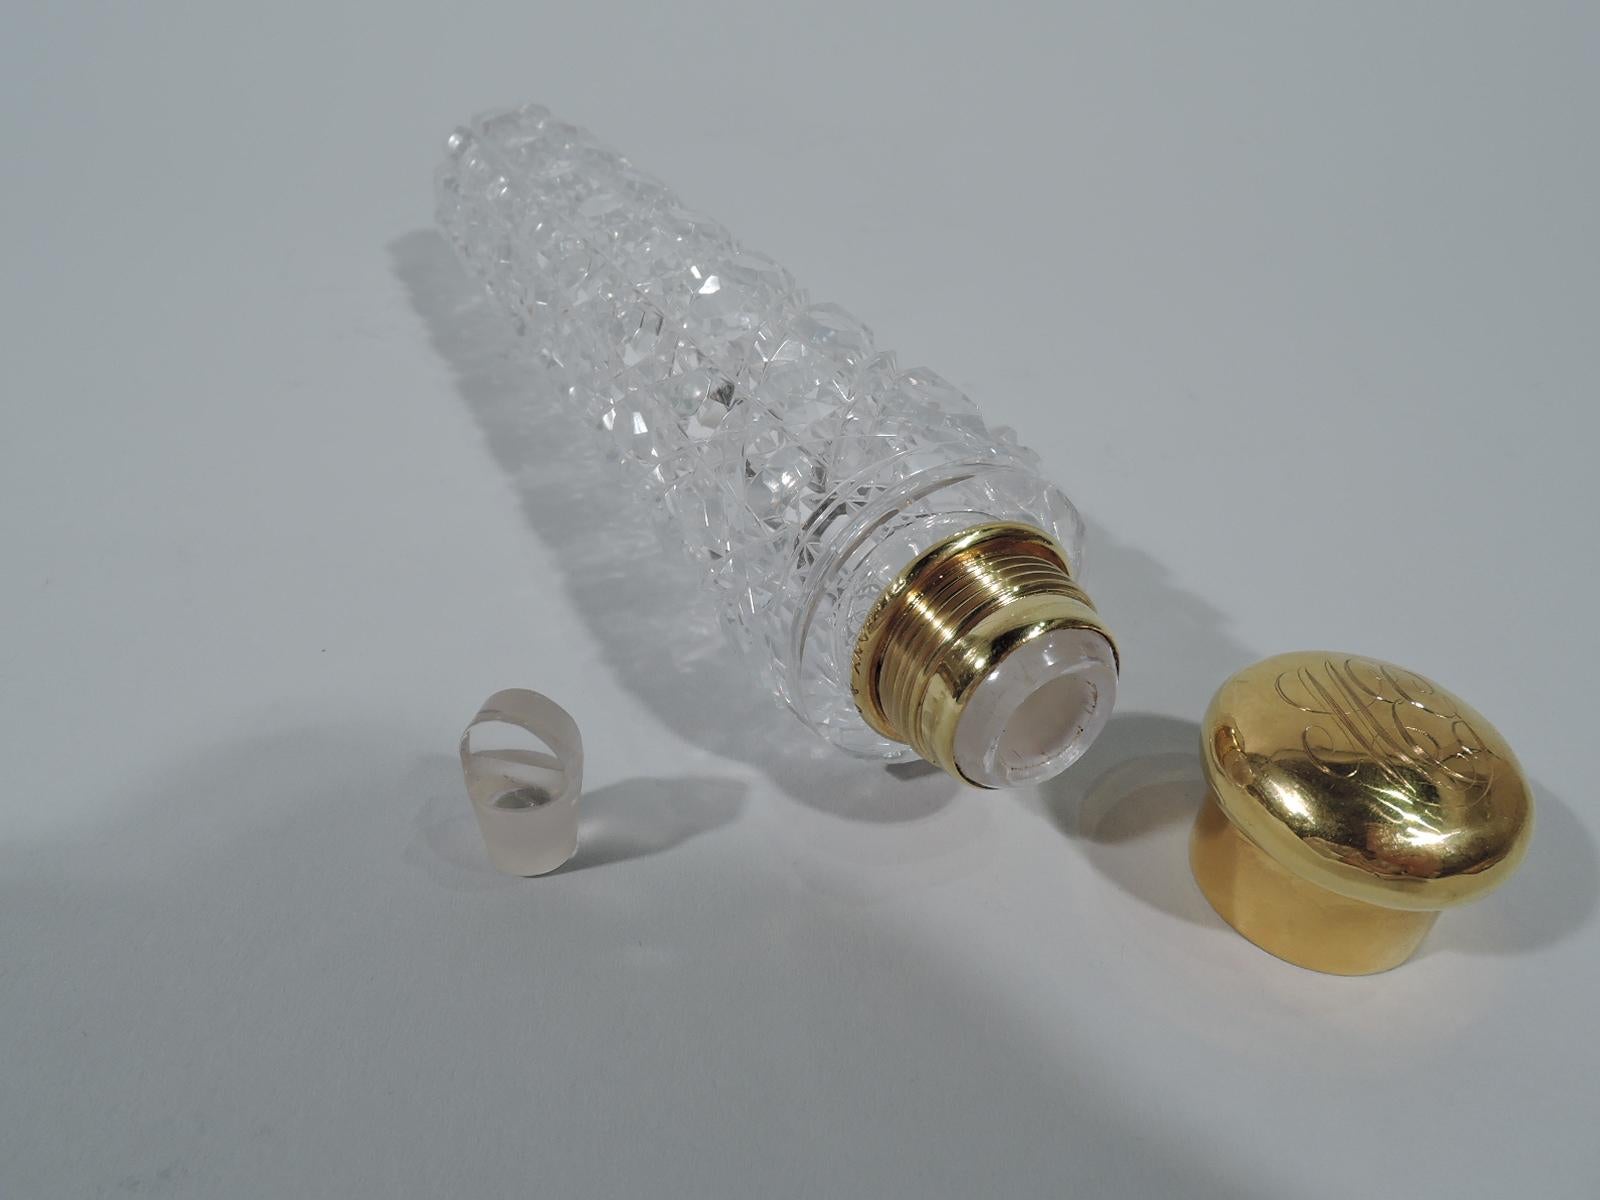 American brilliant-cut-glass and 18-karat gold perfume vial. Made by Tiffany & Co. in New York, circa 1900. Tubular with square grid. Ornament comprises faceted X’s alternating with faceted rondels. Short neck with gold collar and threaded cover